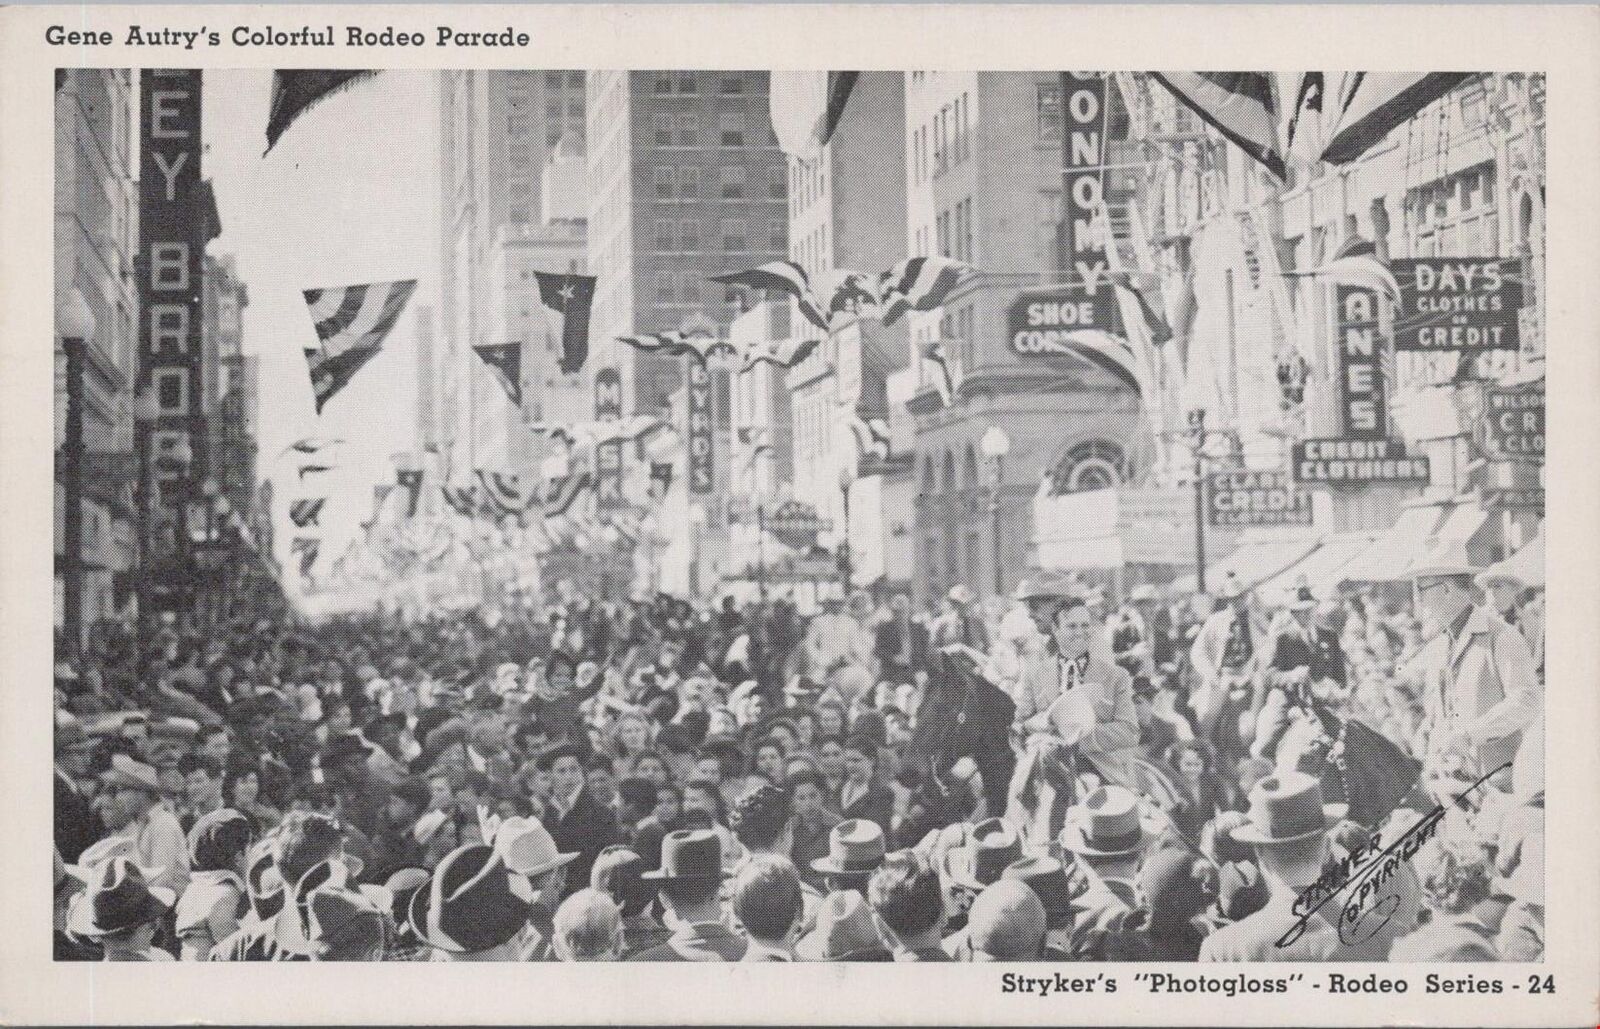 Postcard Rodeo Gene Autry's Colorful Parade 